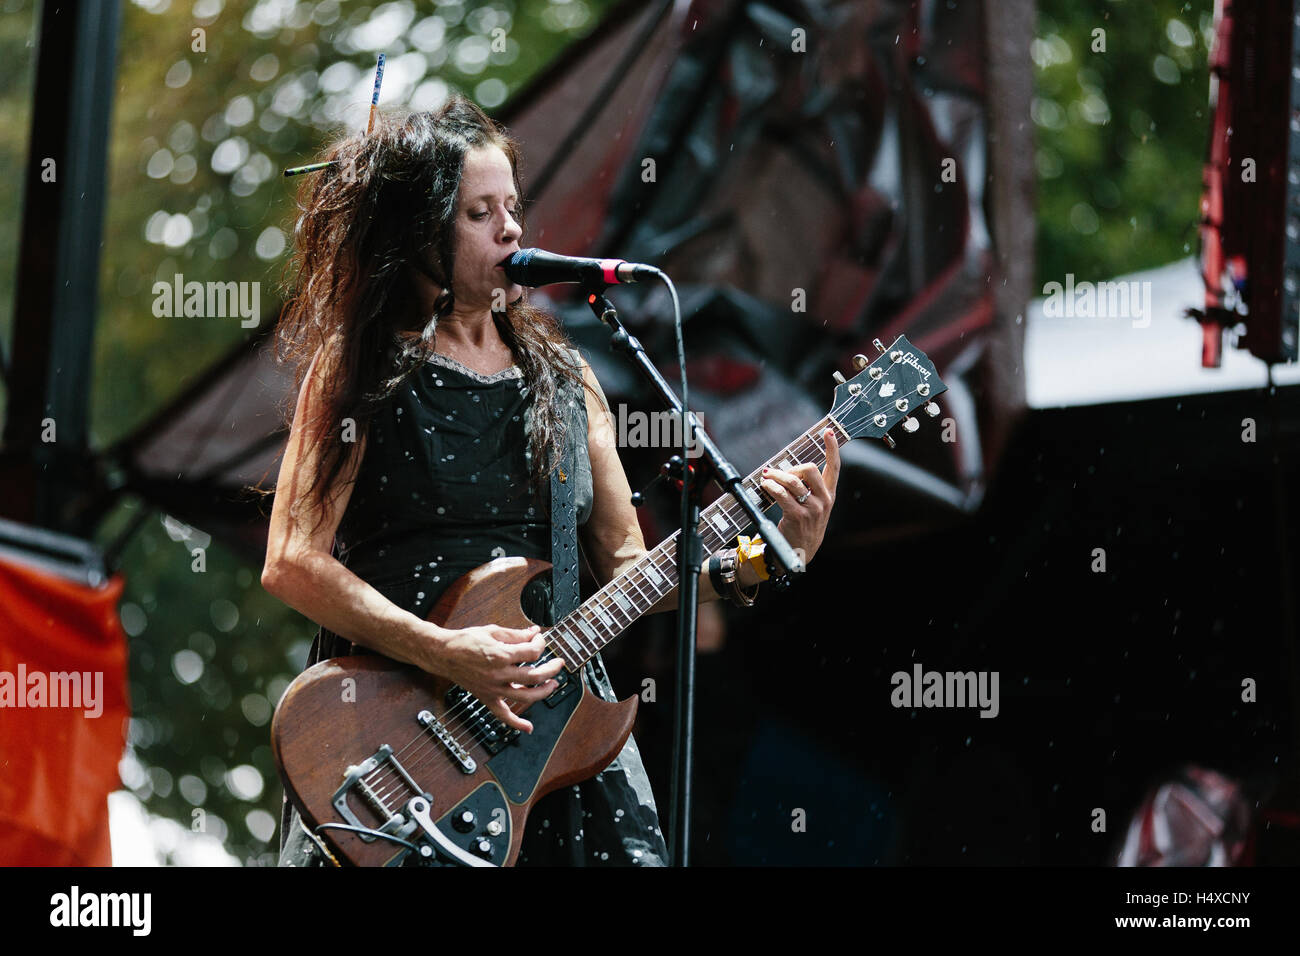 Babes in Toyland performs at Bumbershoot Festival on September 5, 2015 in Seattle, Washington. Stock Photo